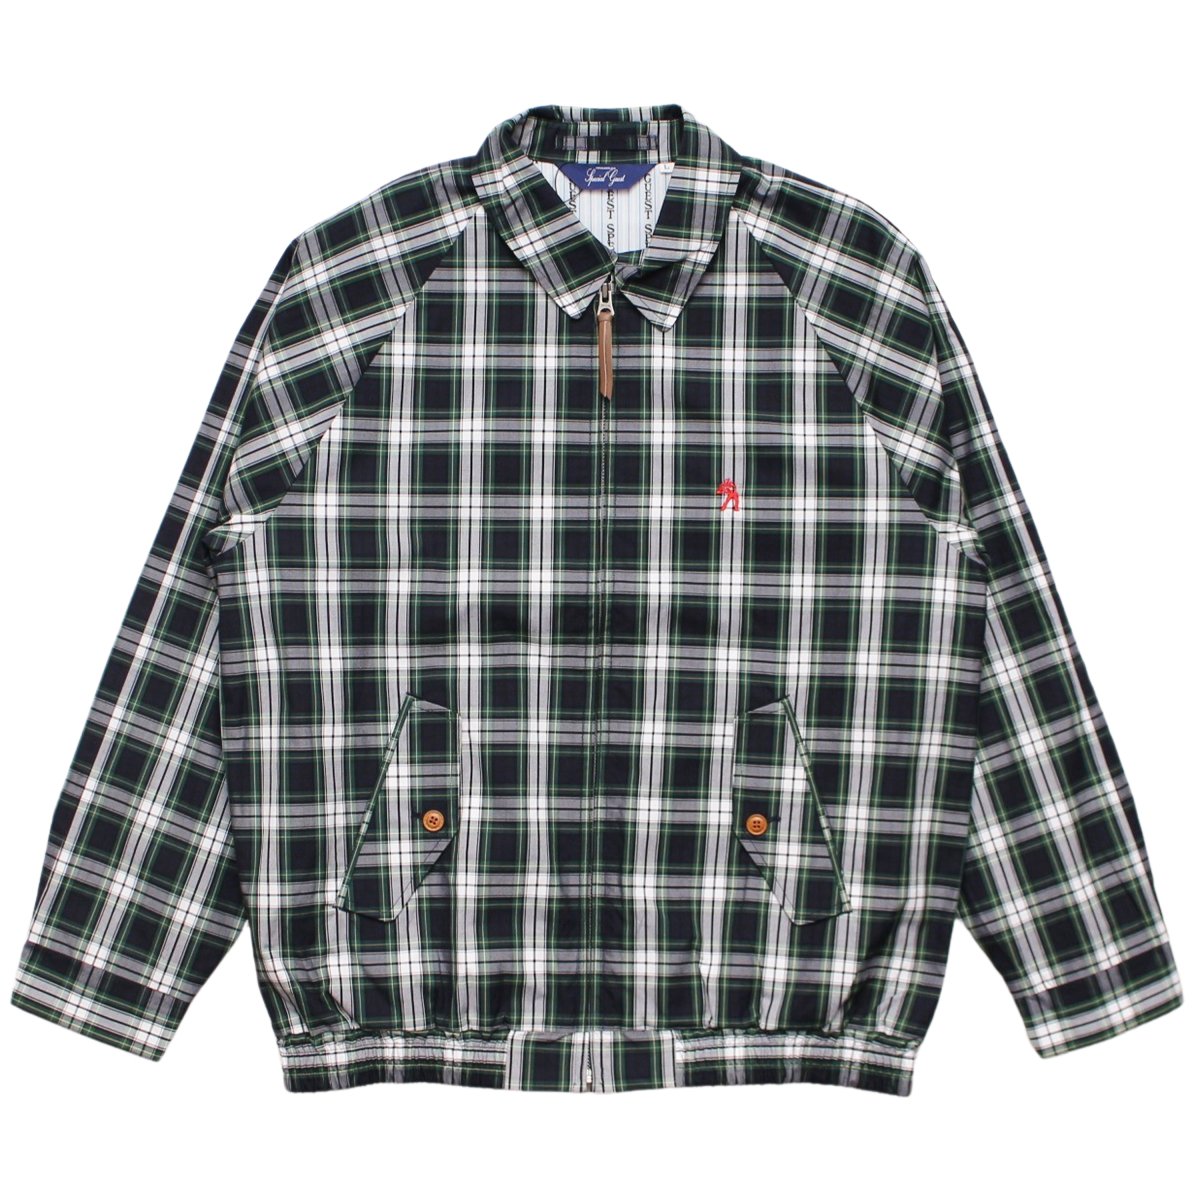 Swing Top Check Jacket